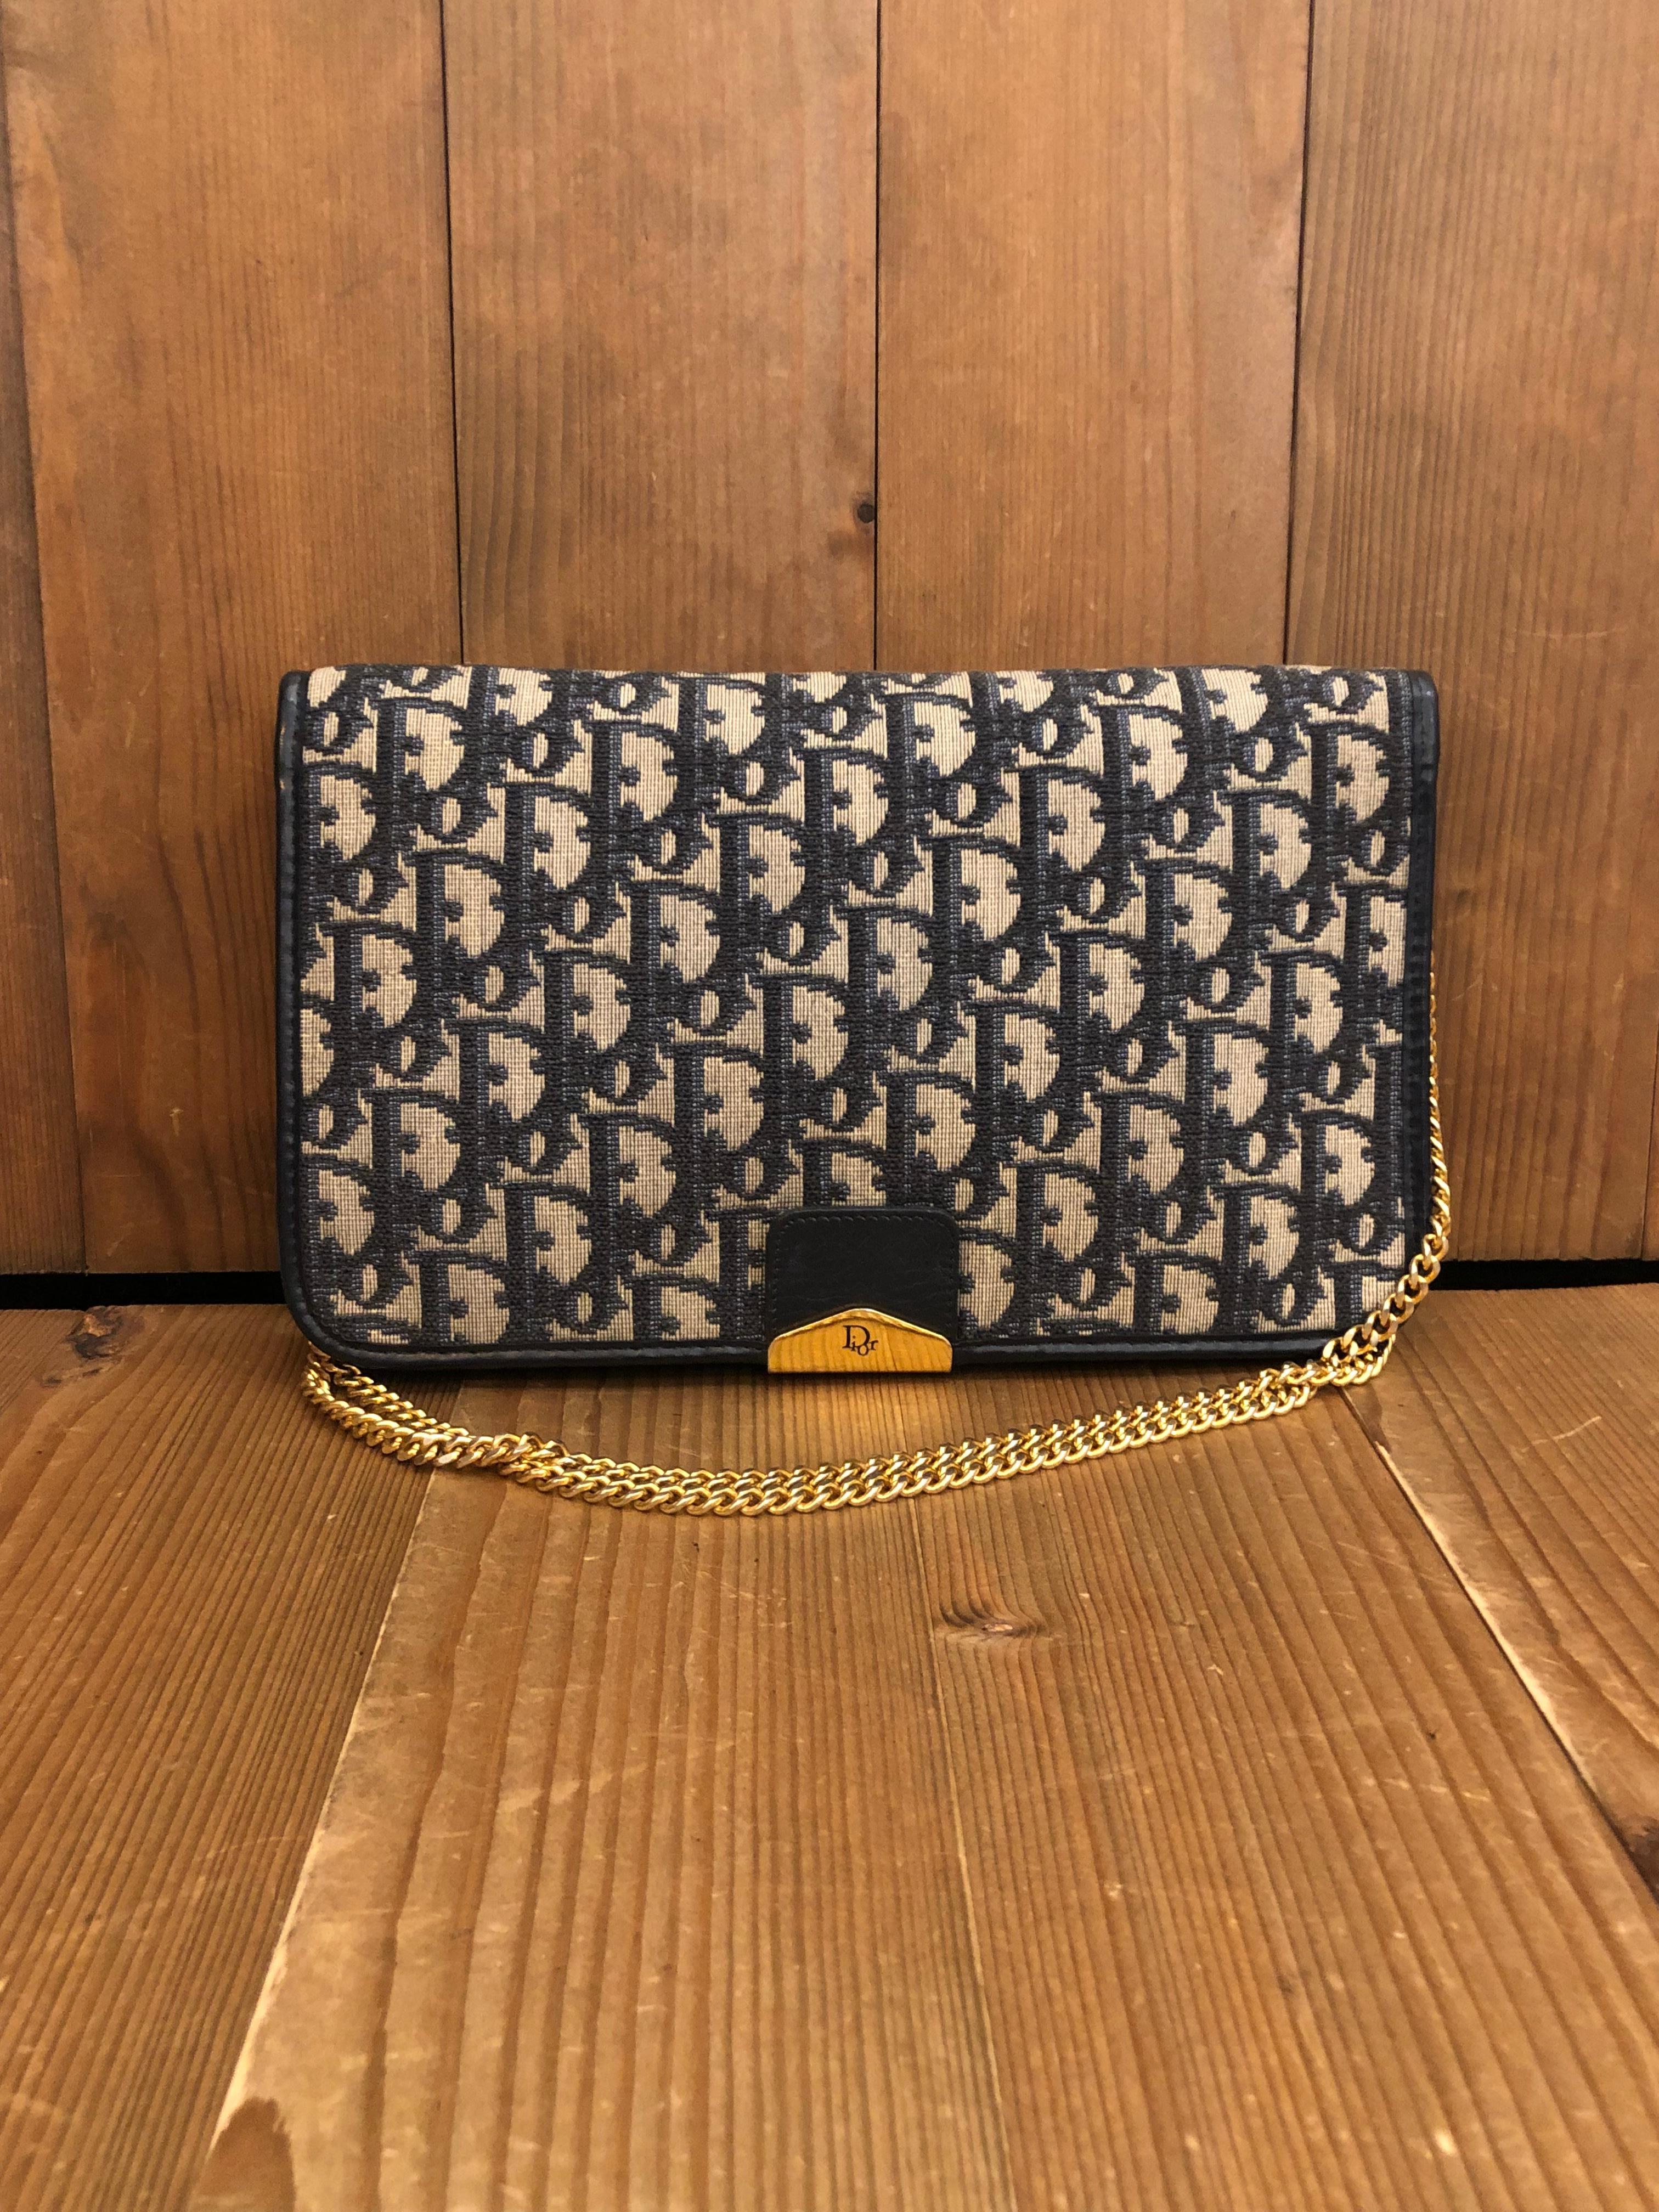 1970s CHRISTIAN DIOR Chain Shoulder Bag in Dior's iconic navy trotter jacquard features two main flat pockets and one small pocket in the middle. Made in France. Measures 10 x 6 x 1 inches Chain drop 16.5 inches at its longest. It can be worn